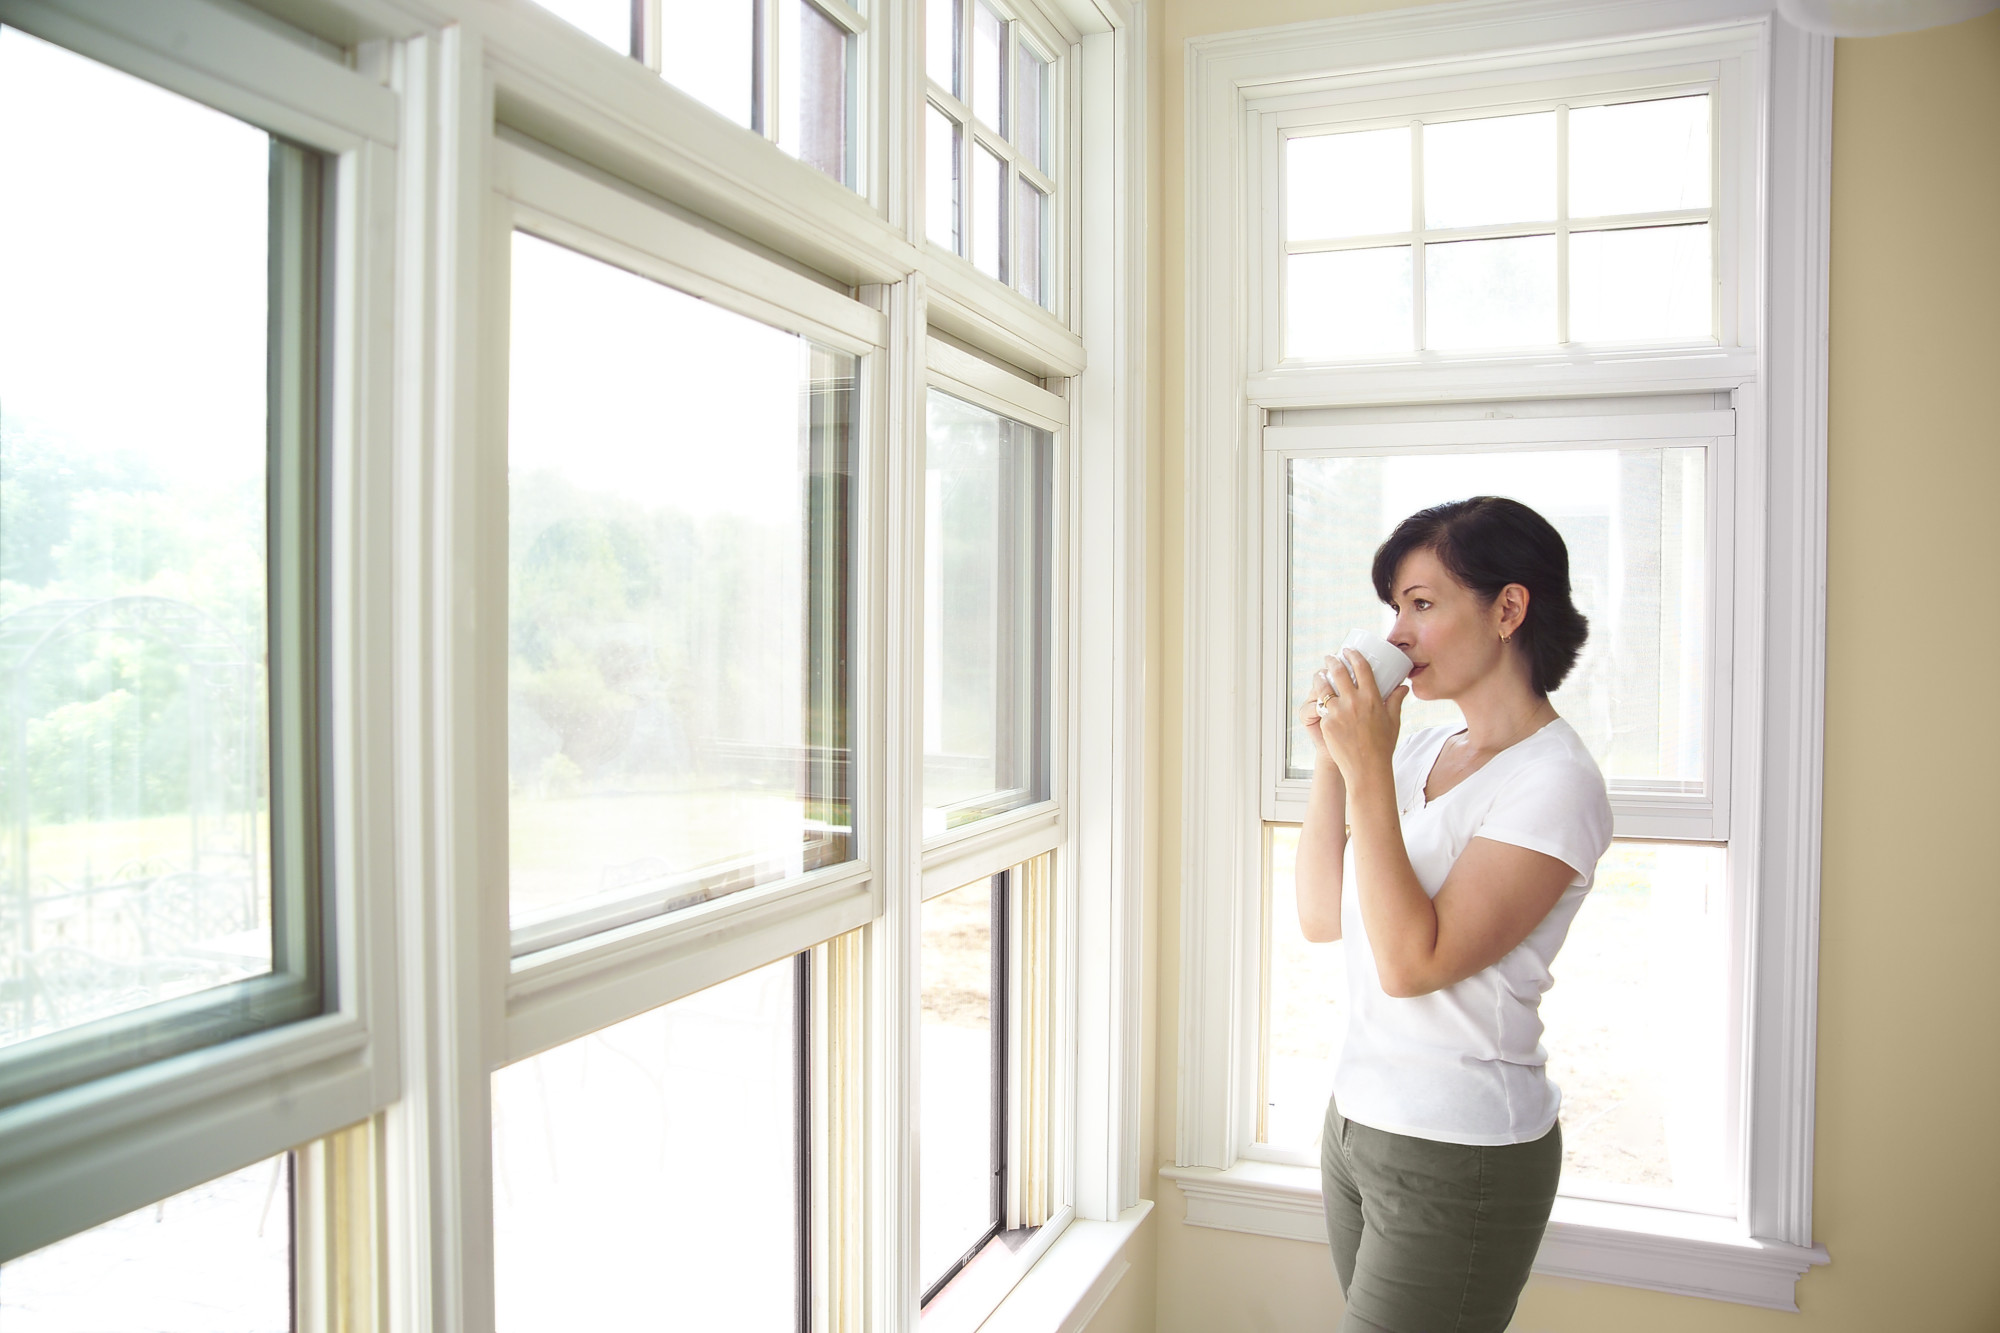 New Windows: What to Look for When Choosing - The Pro Gallery